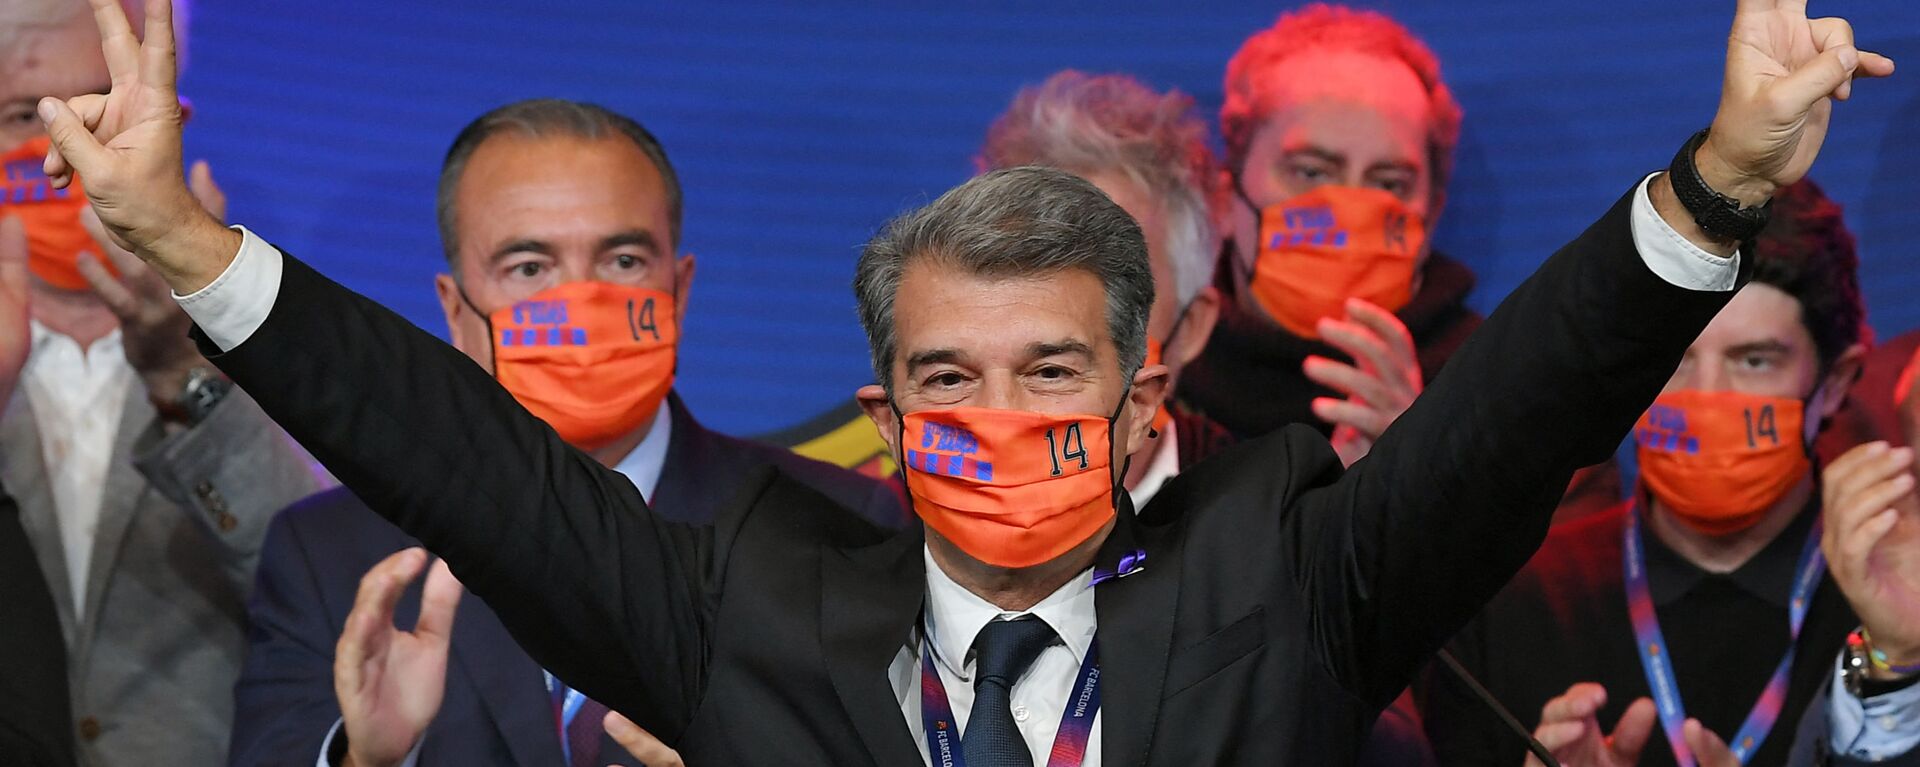 Spanish lawyer Joan Laporta celebrates his victory at the auditorium of the Camp Nou complex after winning the election for the FC Barcelona presidency on March 7, 2021 in Barcelona. - اسپوتنیک افغانستان  , 1920, 15.08.2021